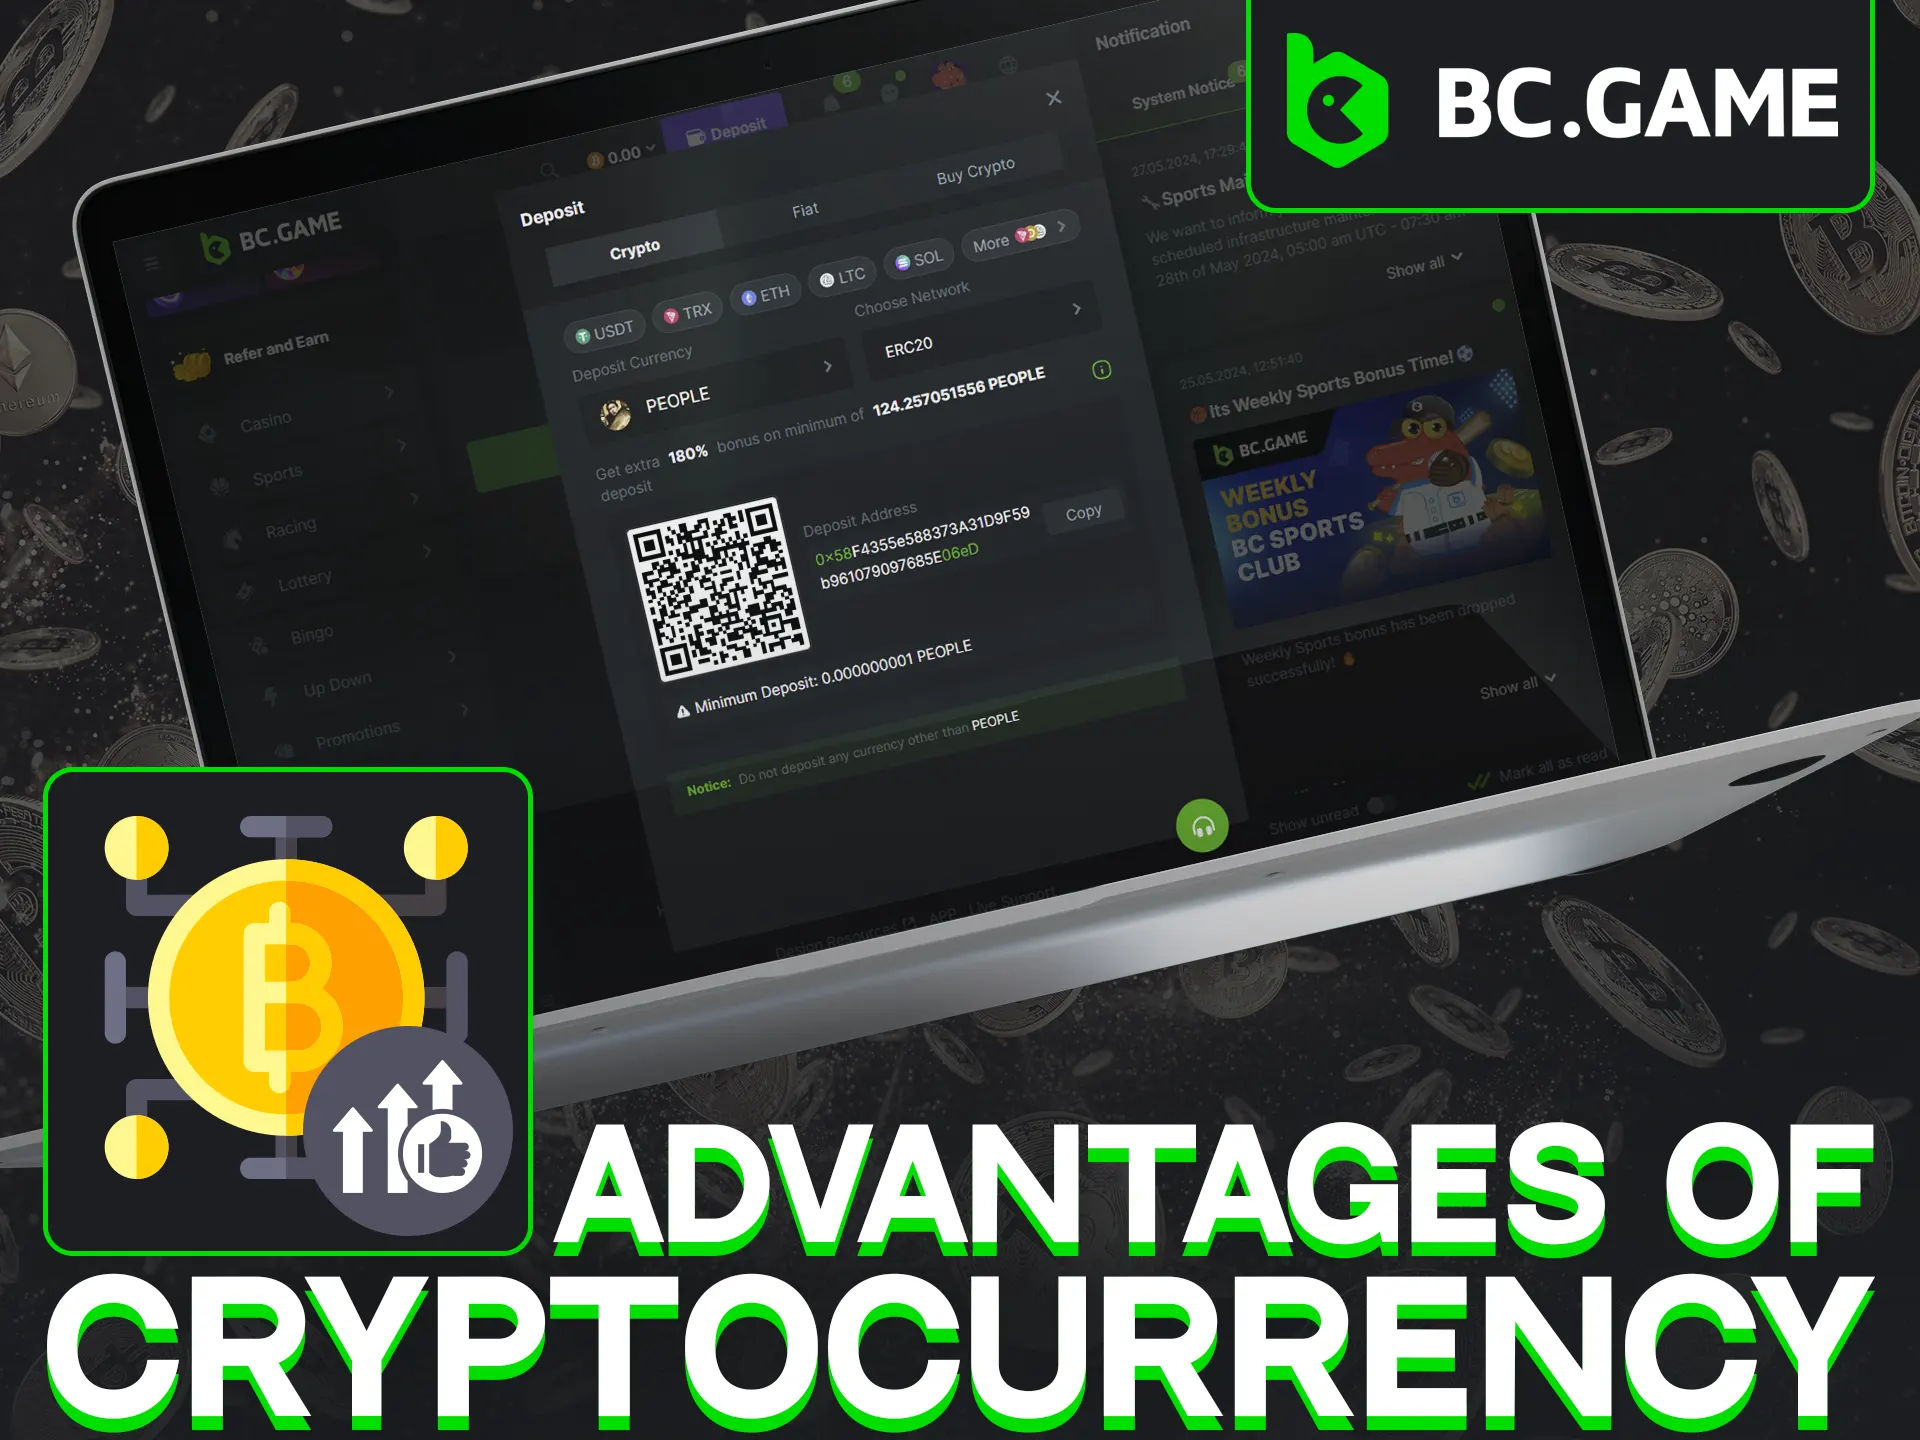 Learn about advantages of depositing cryptocurrency at BC Game.